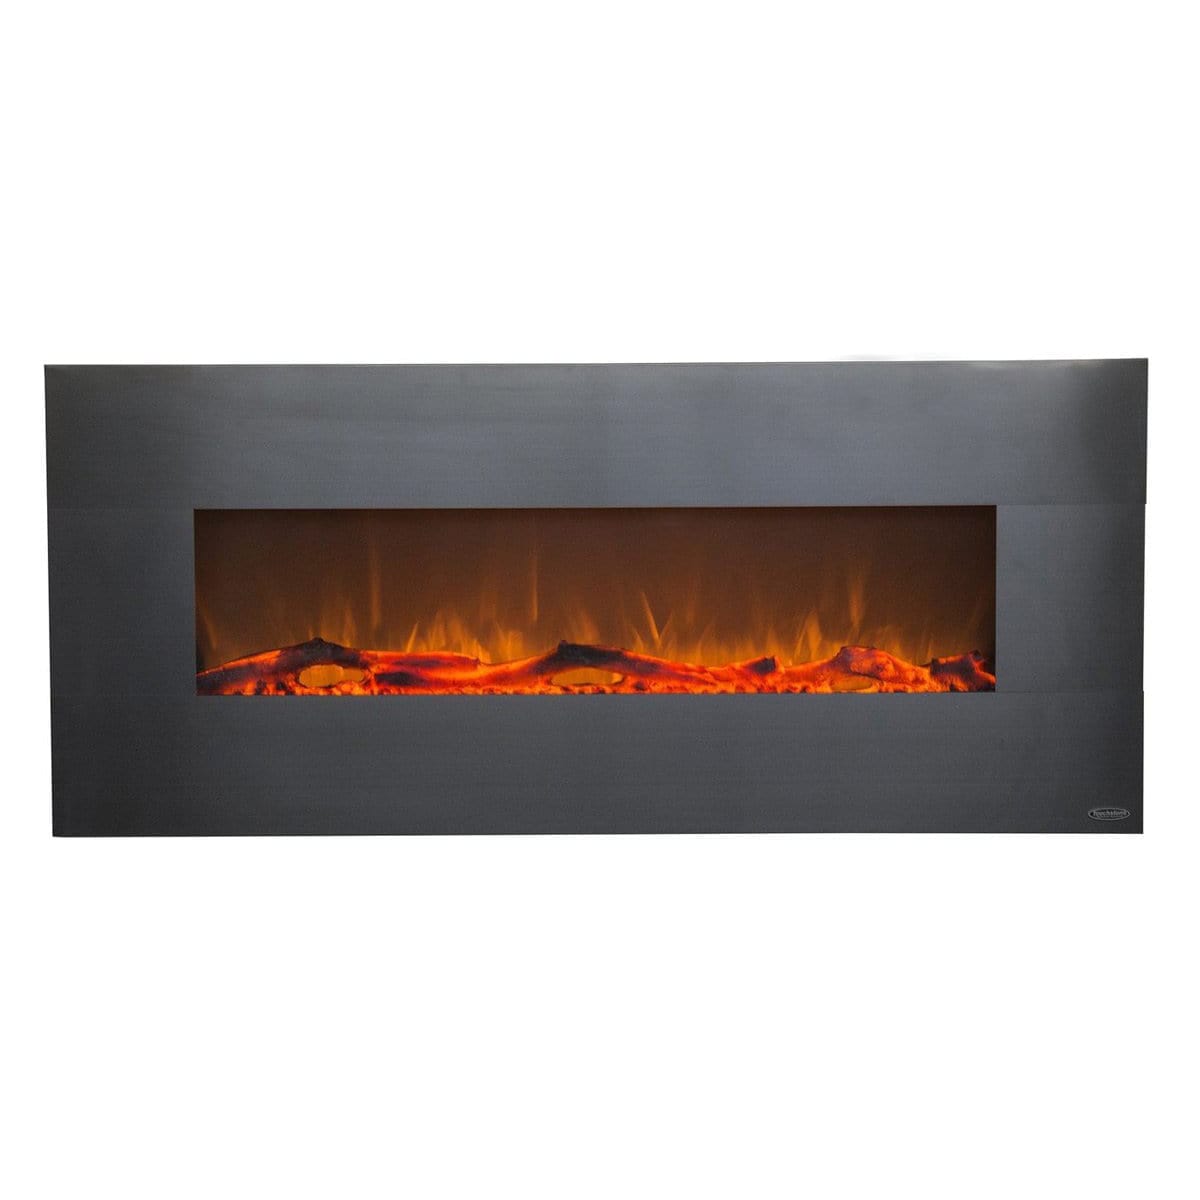 The Onyx Stainless 50" Wall Mounted Electric Fireplace Touchstone